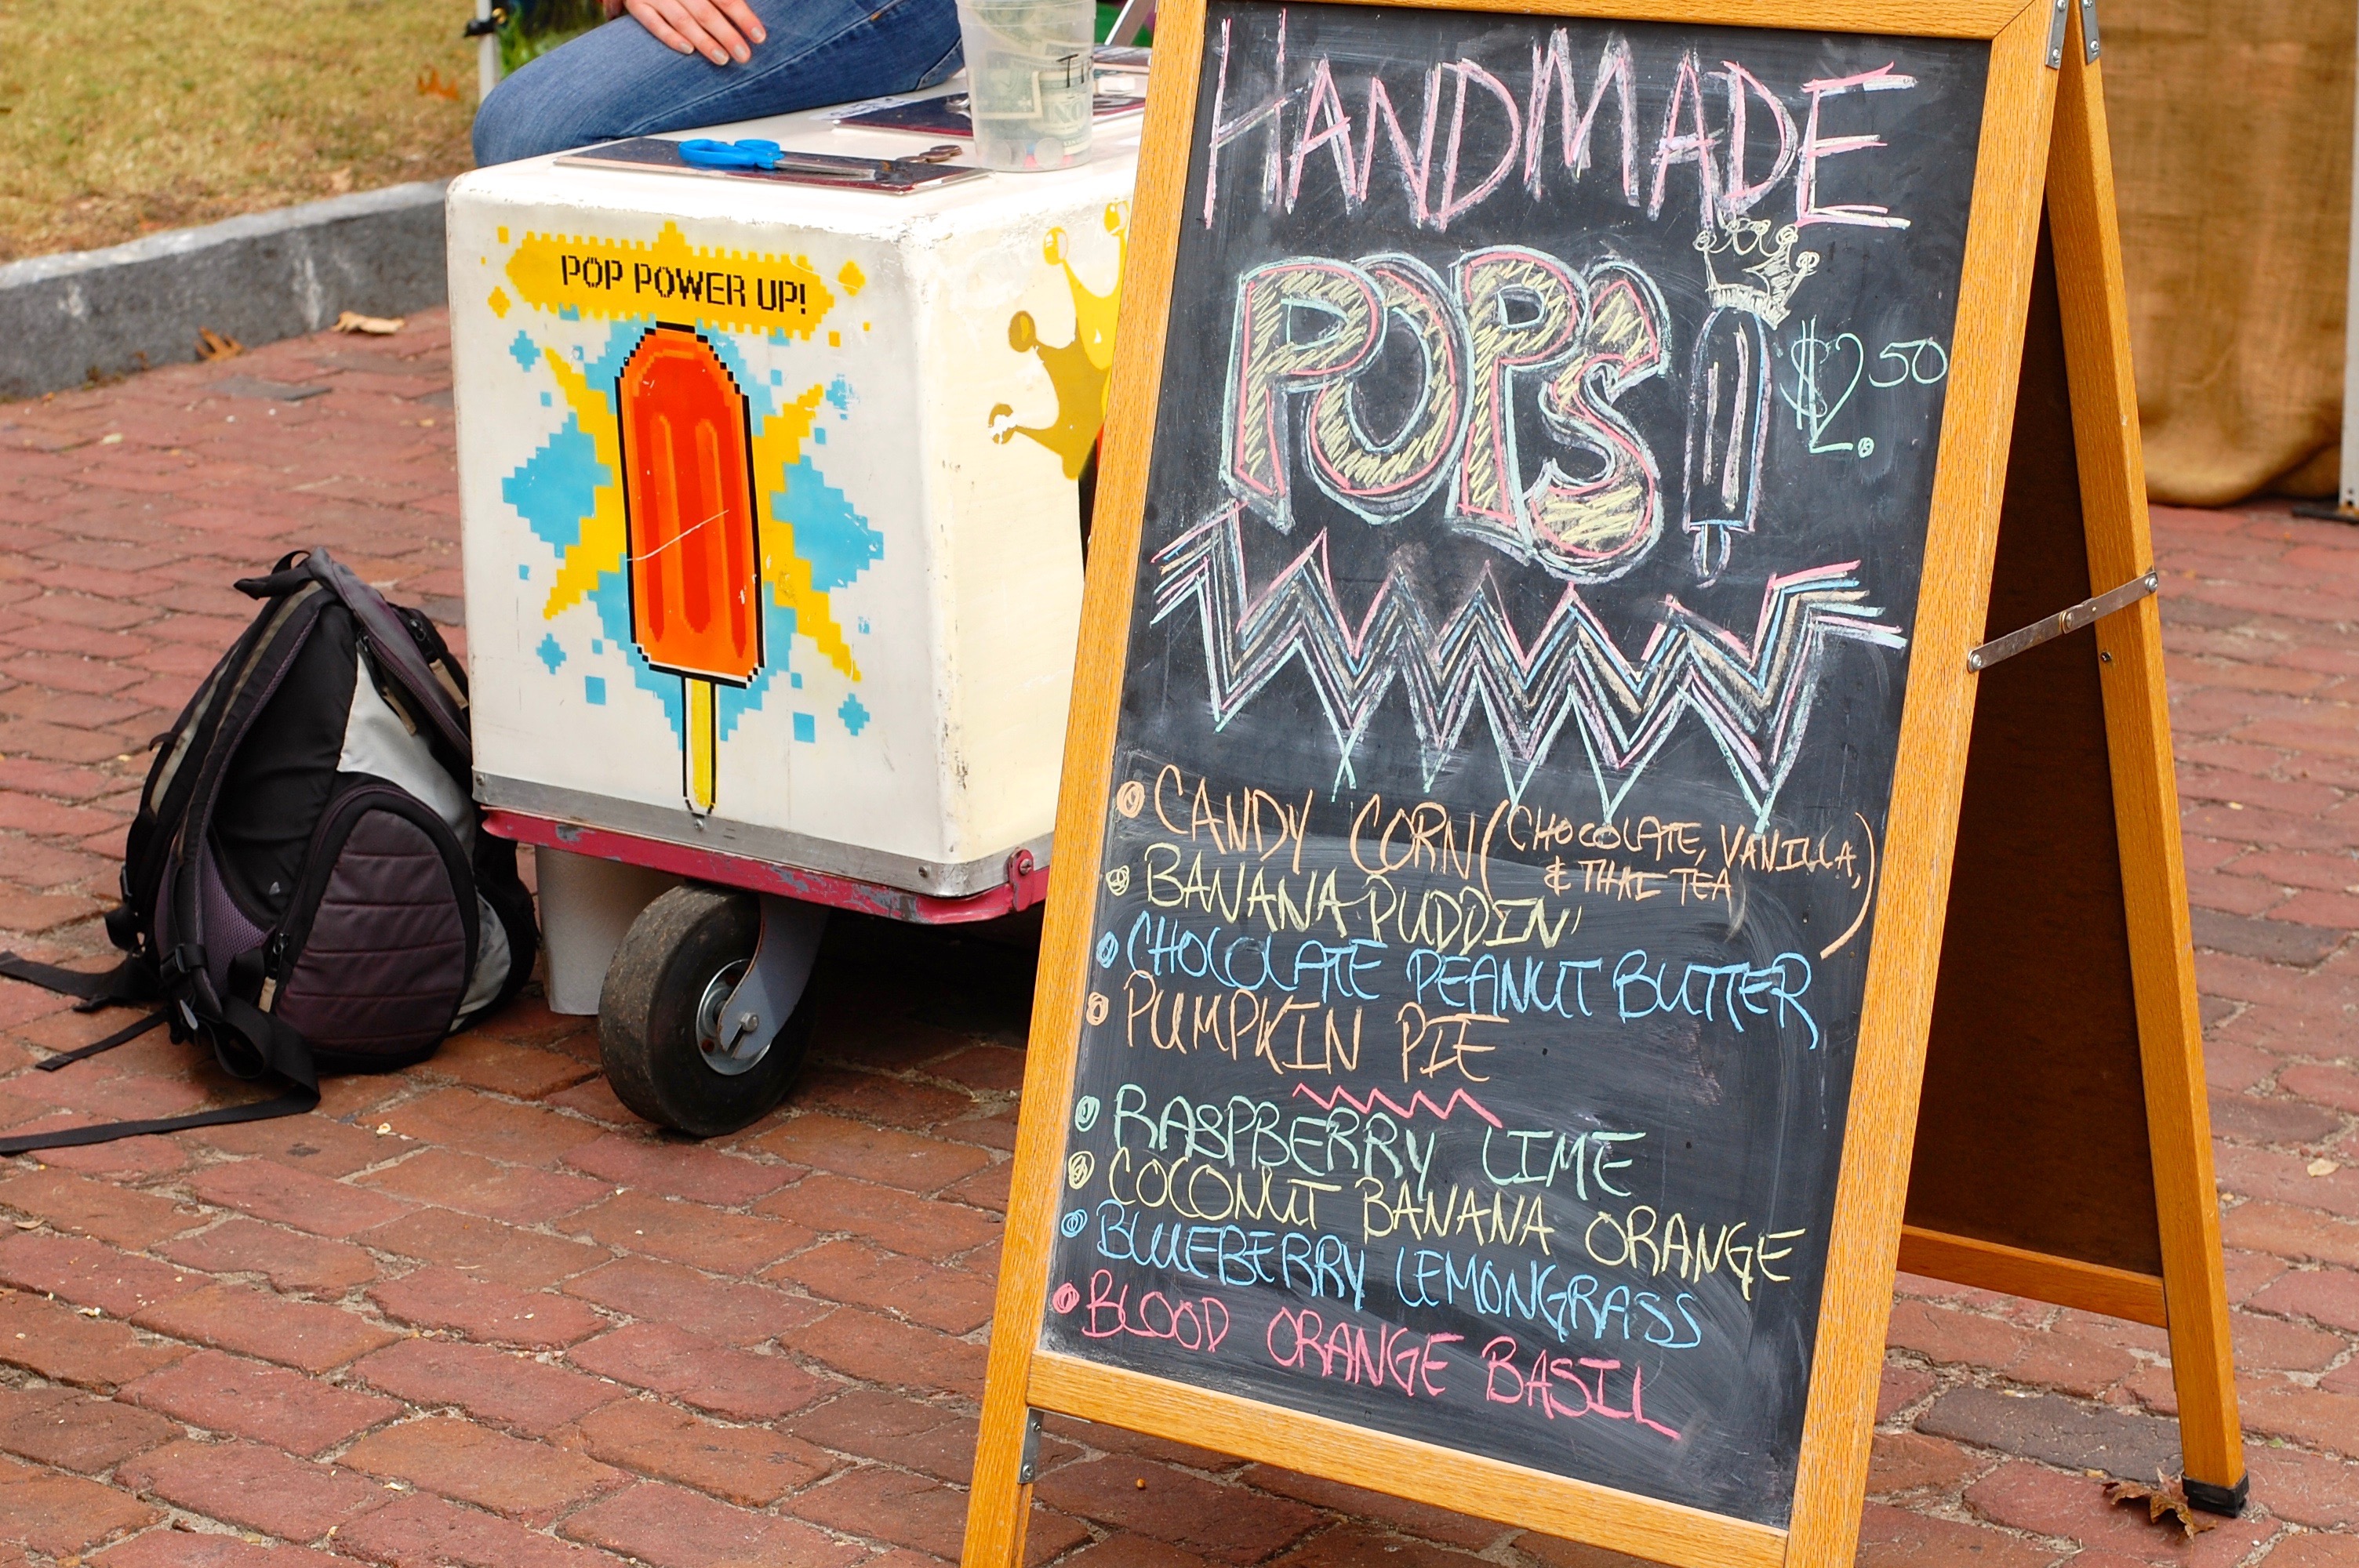 A2F Charleston Farmers Market handmade popsicles from King of Pops